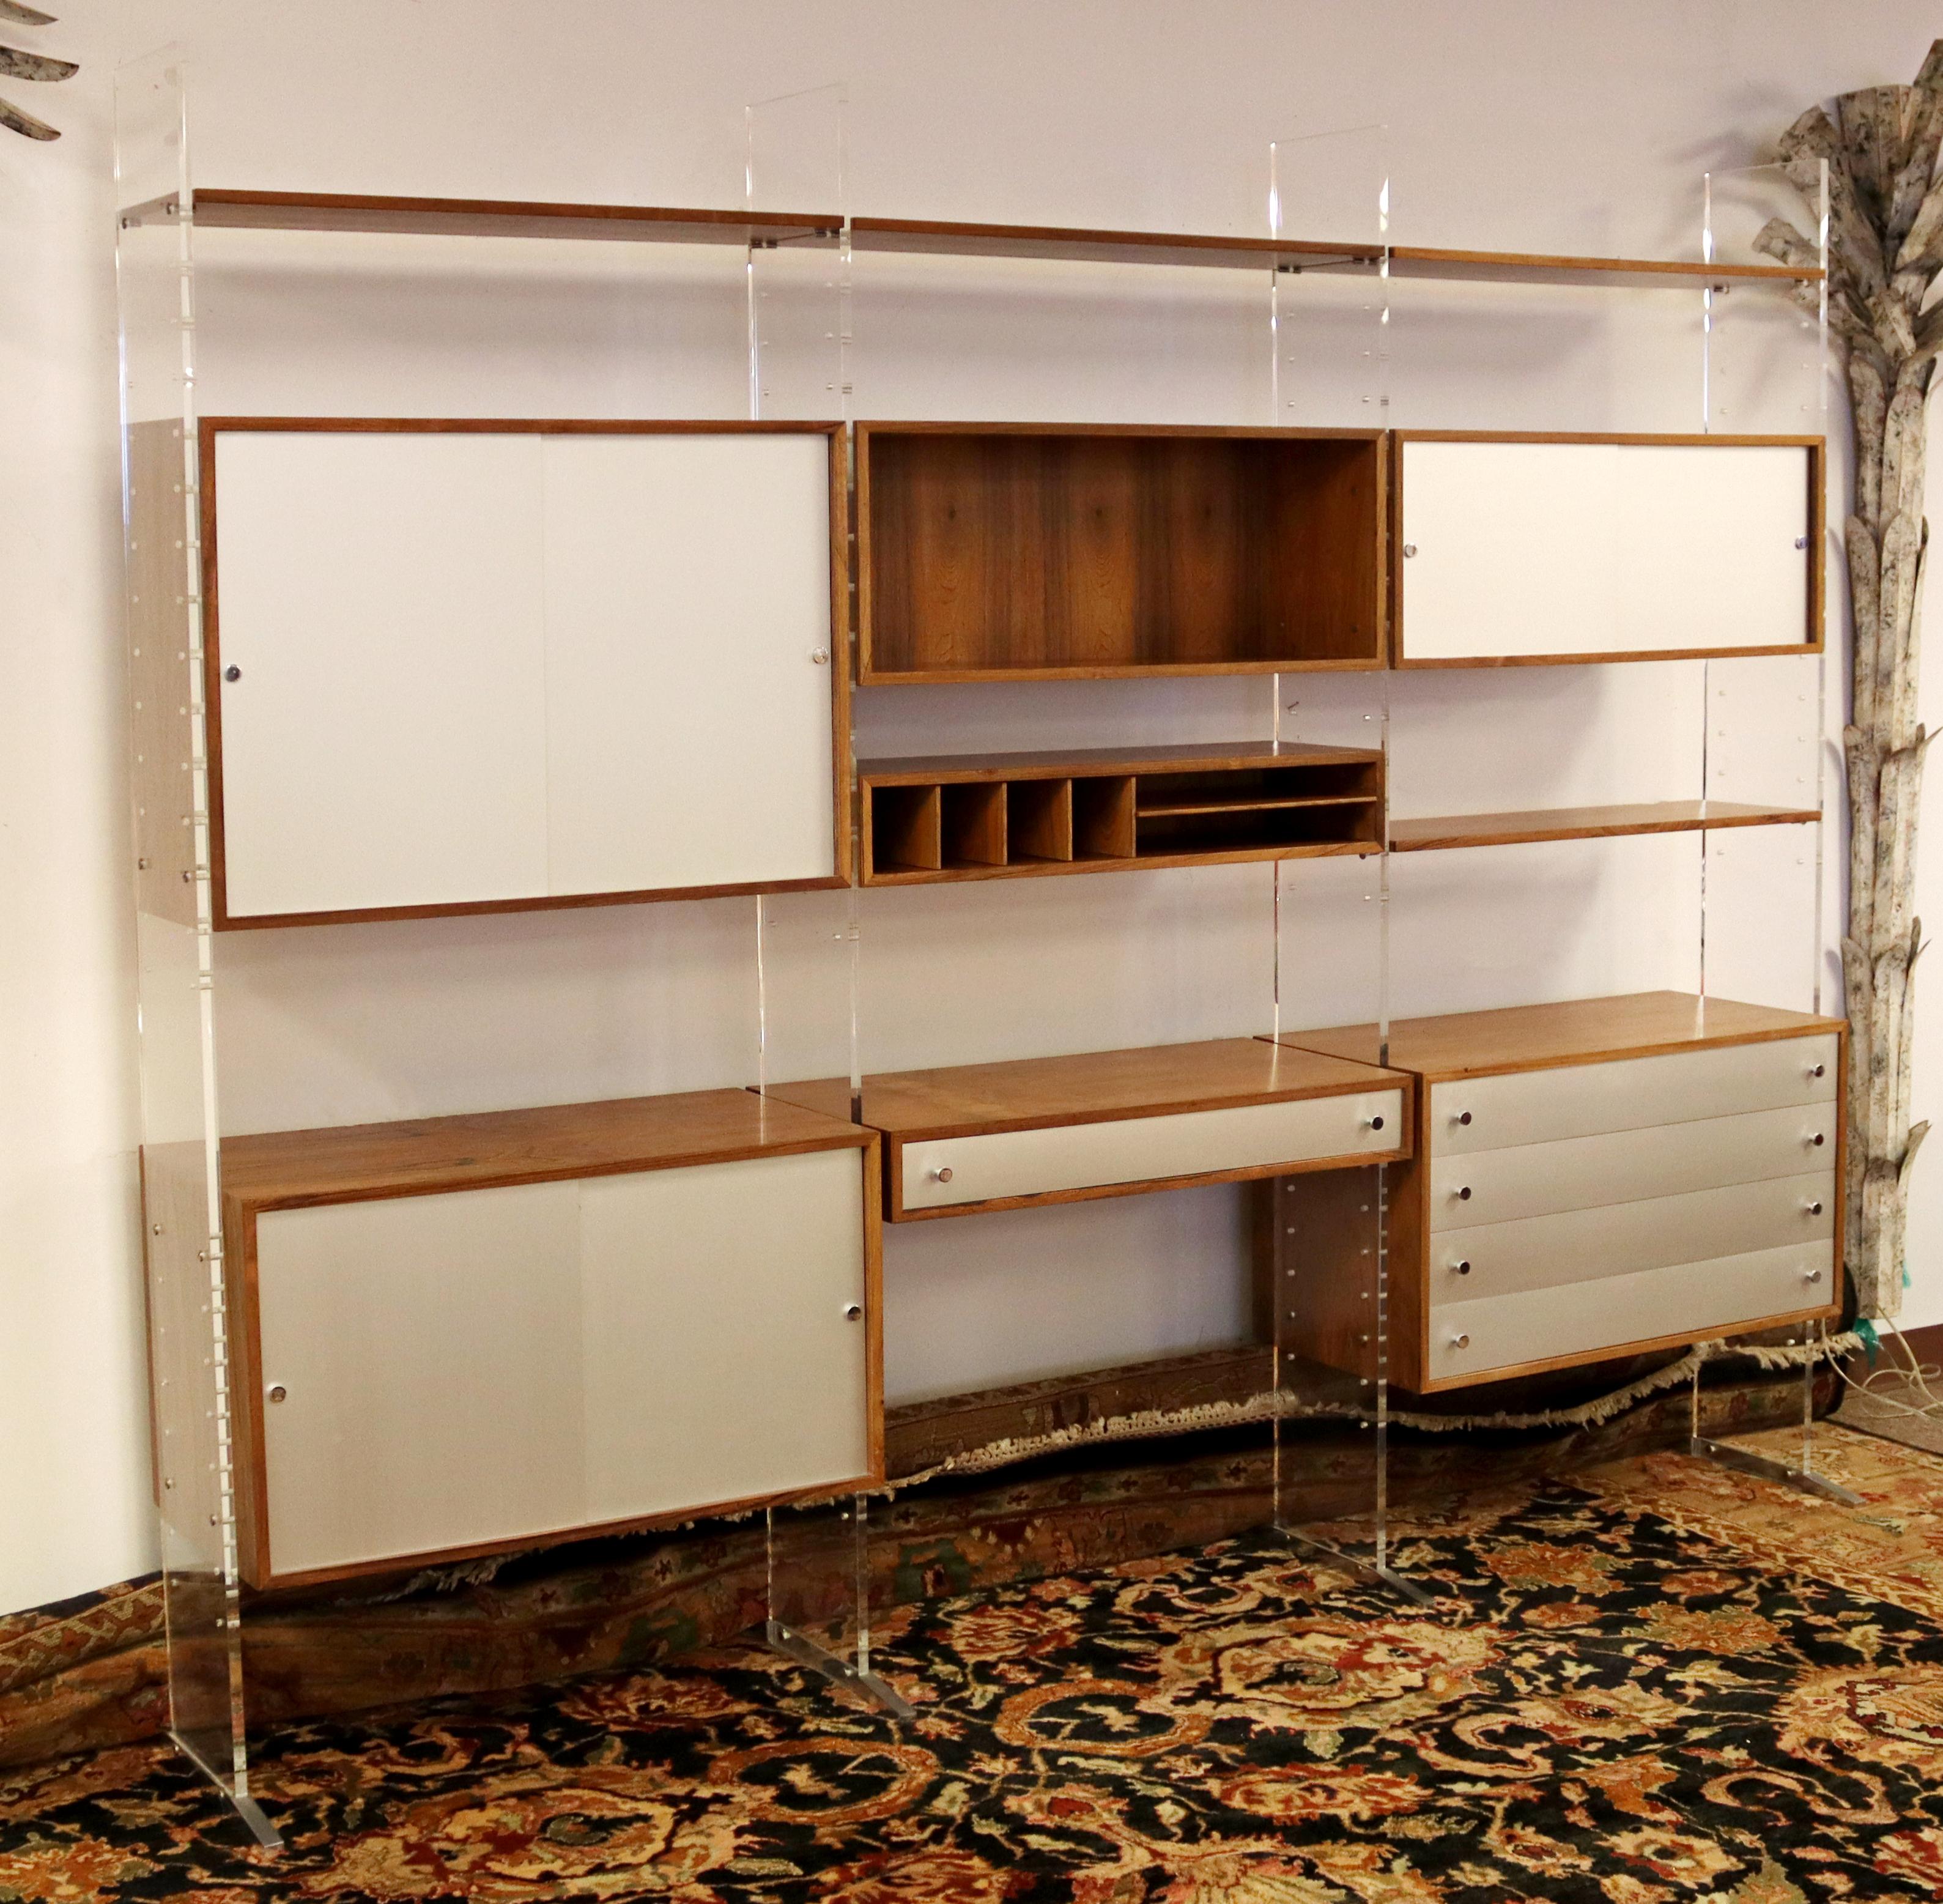 For your consideration is an utterly outstanding, three bay wall unit, with several compartments and shelfs, made of lucite and wood, by Georg Petersens, made in Denmark, circa the 1970s. In excellent vintage condition. The dimensions are 102